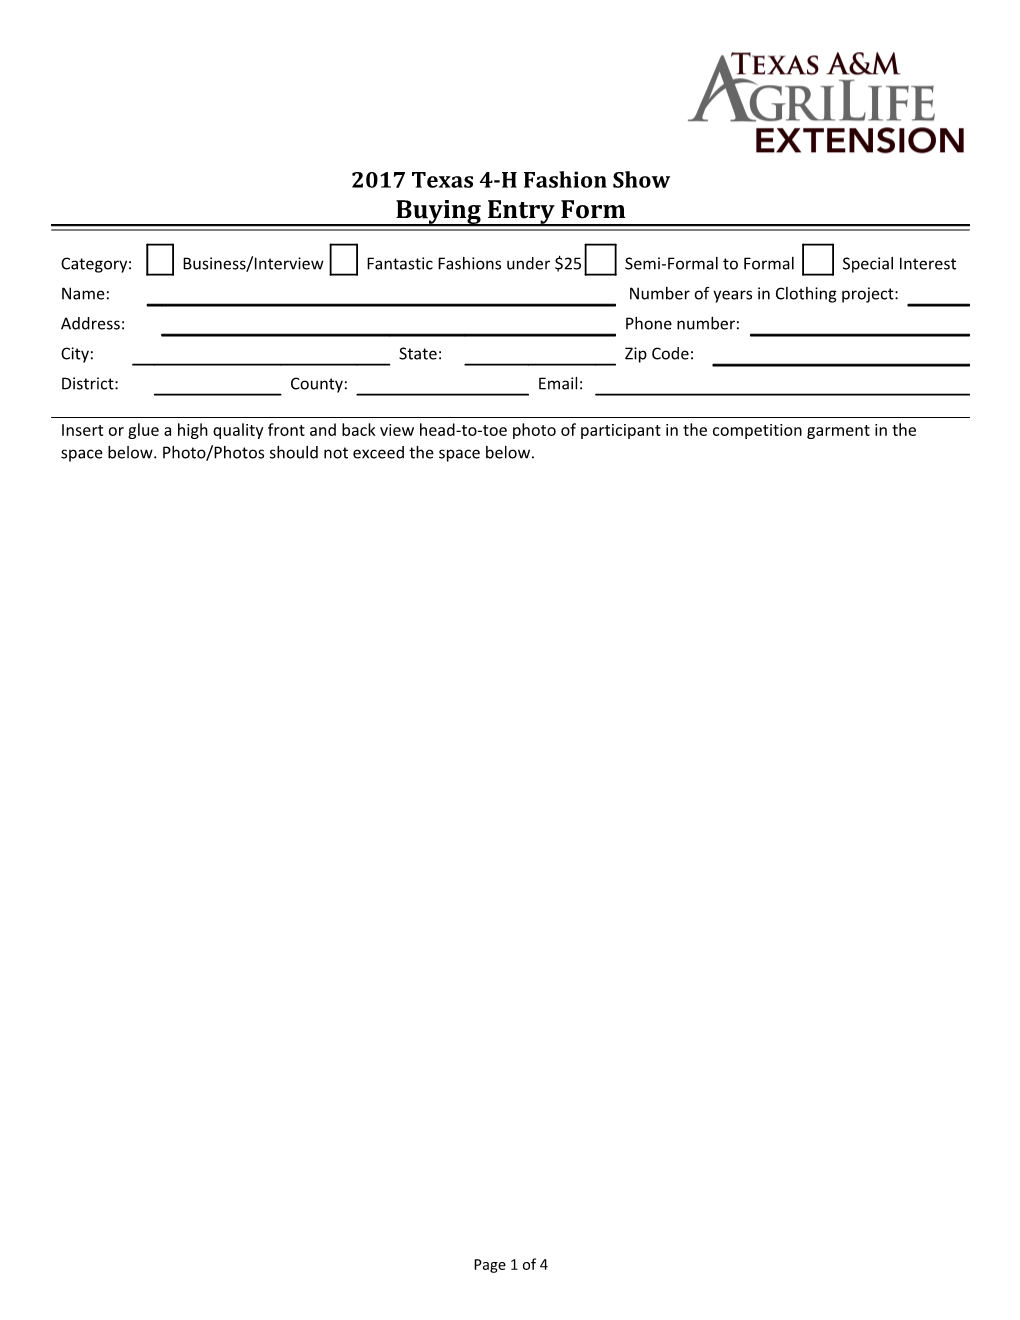 2017 Texas 4-H Fashion Show Buying Entry Form